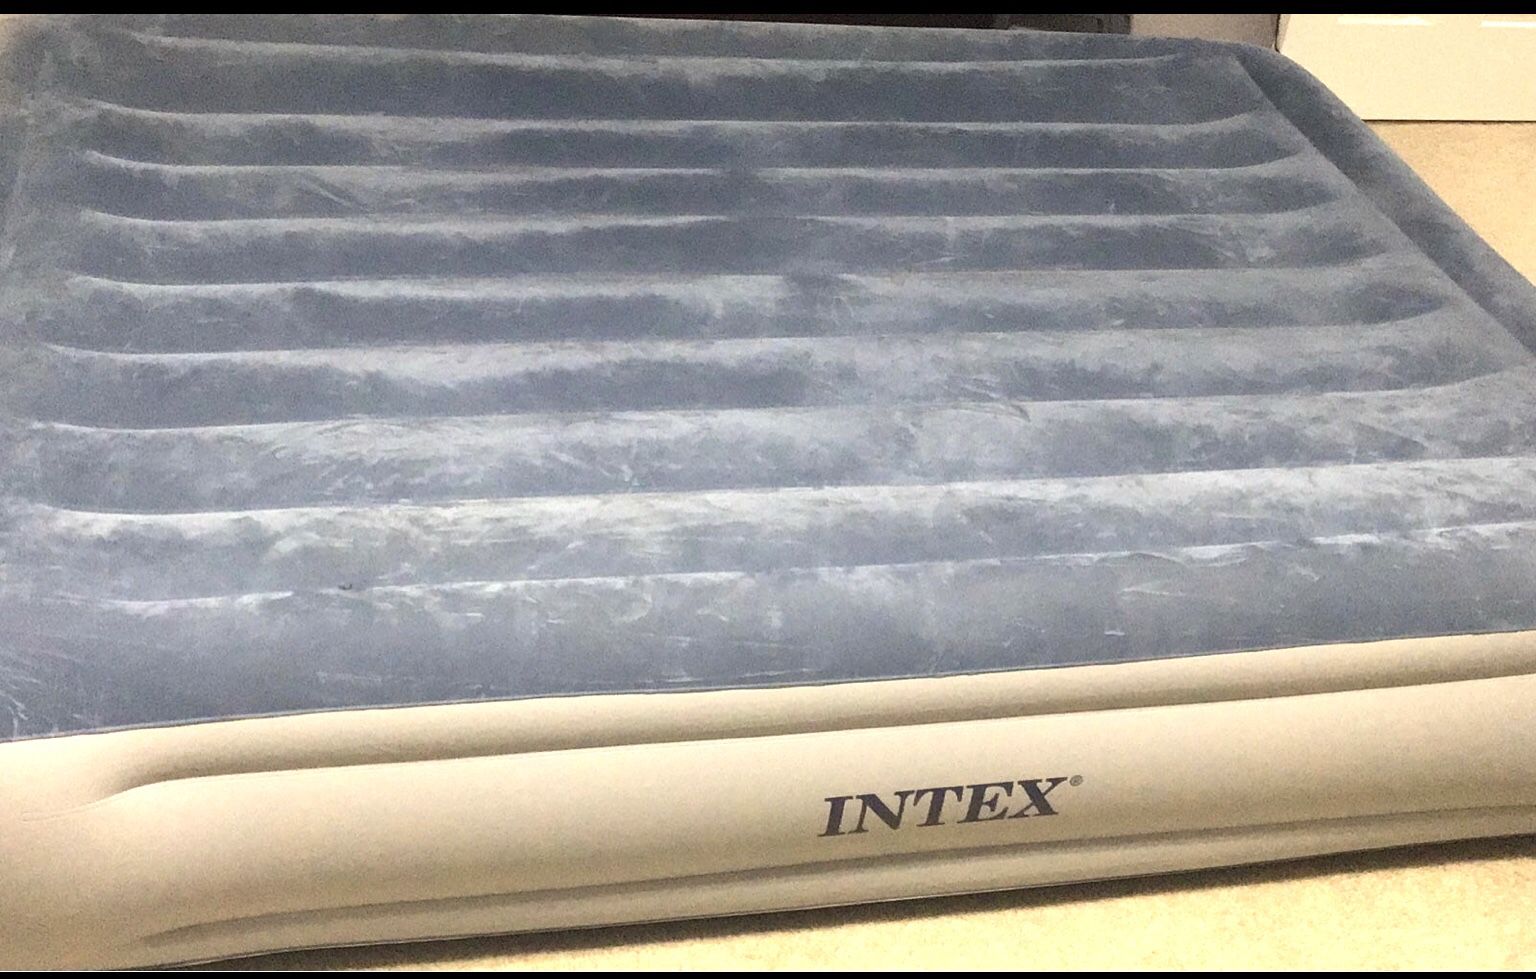 New Low Firmness 15” High Queen Size Intex Air Mattress , Loses Firmness after two Days, can be inflated again to full firmness